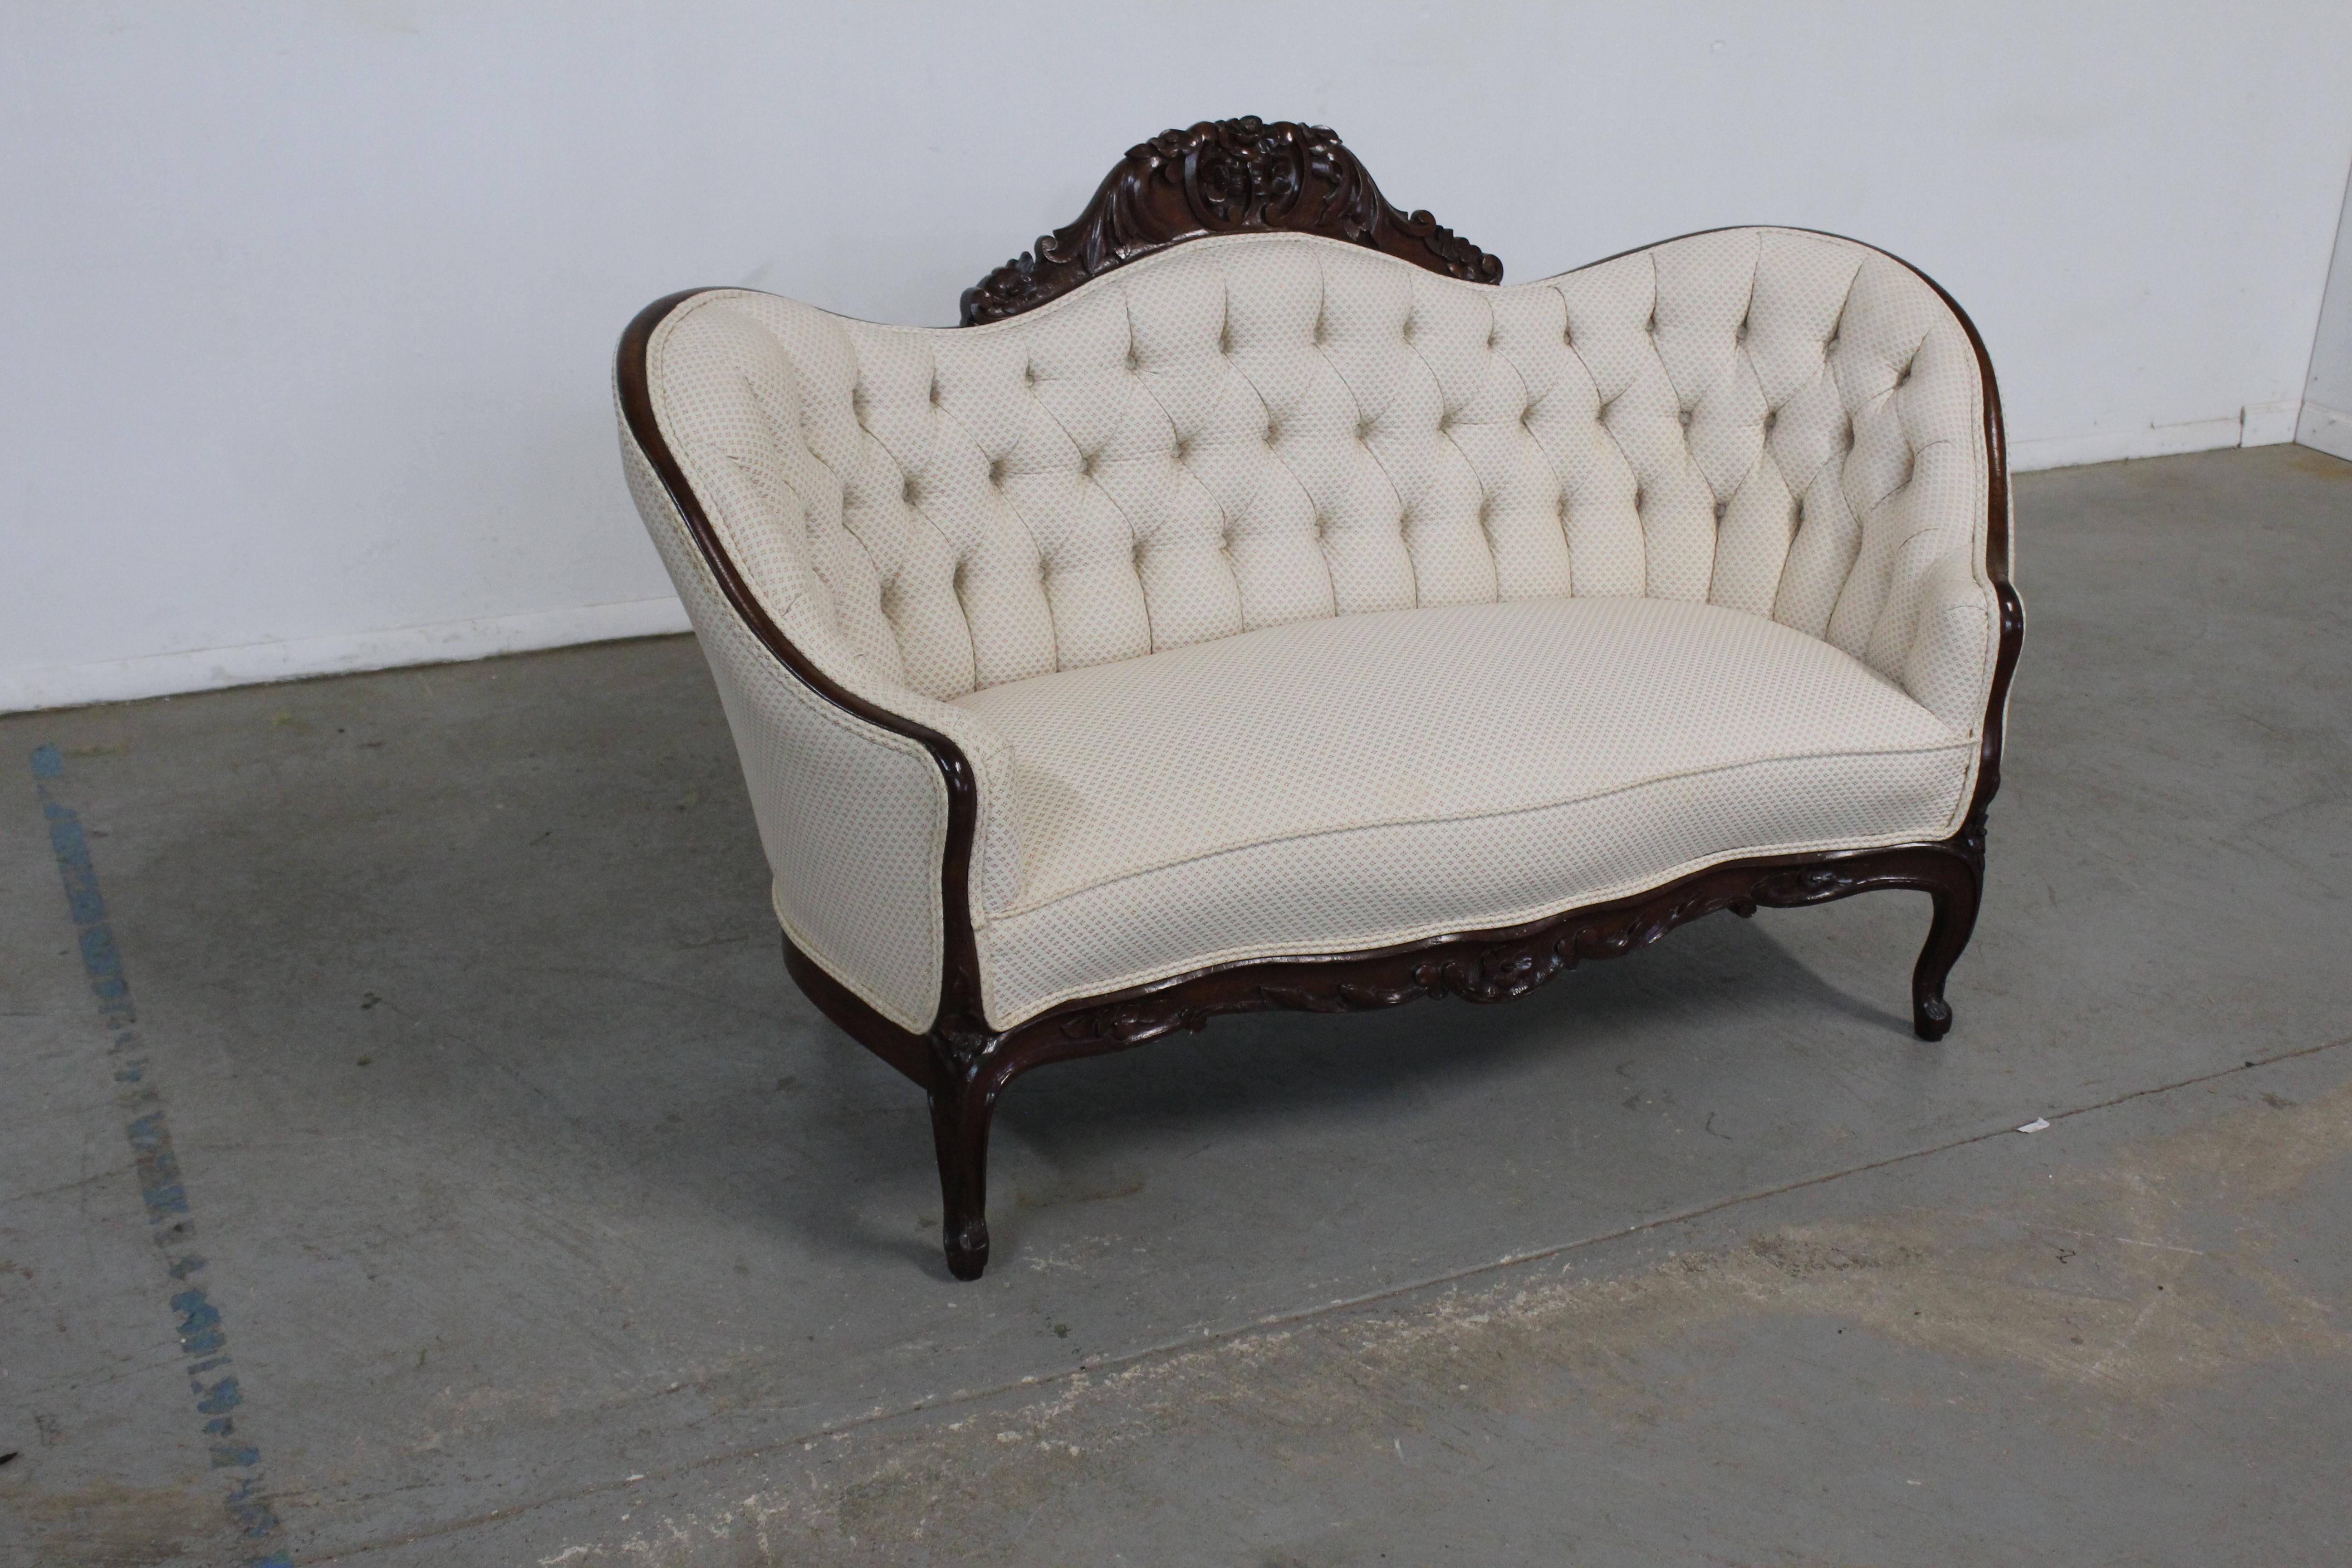 Antique Victorian carved settee/loveseat/sofa.

Offered is a nice Antique Victorian carved settee/loveseat/sofa. The sofa has a great look with nice lines, design, and look. The previous owner had this completely restored( refinished and